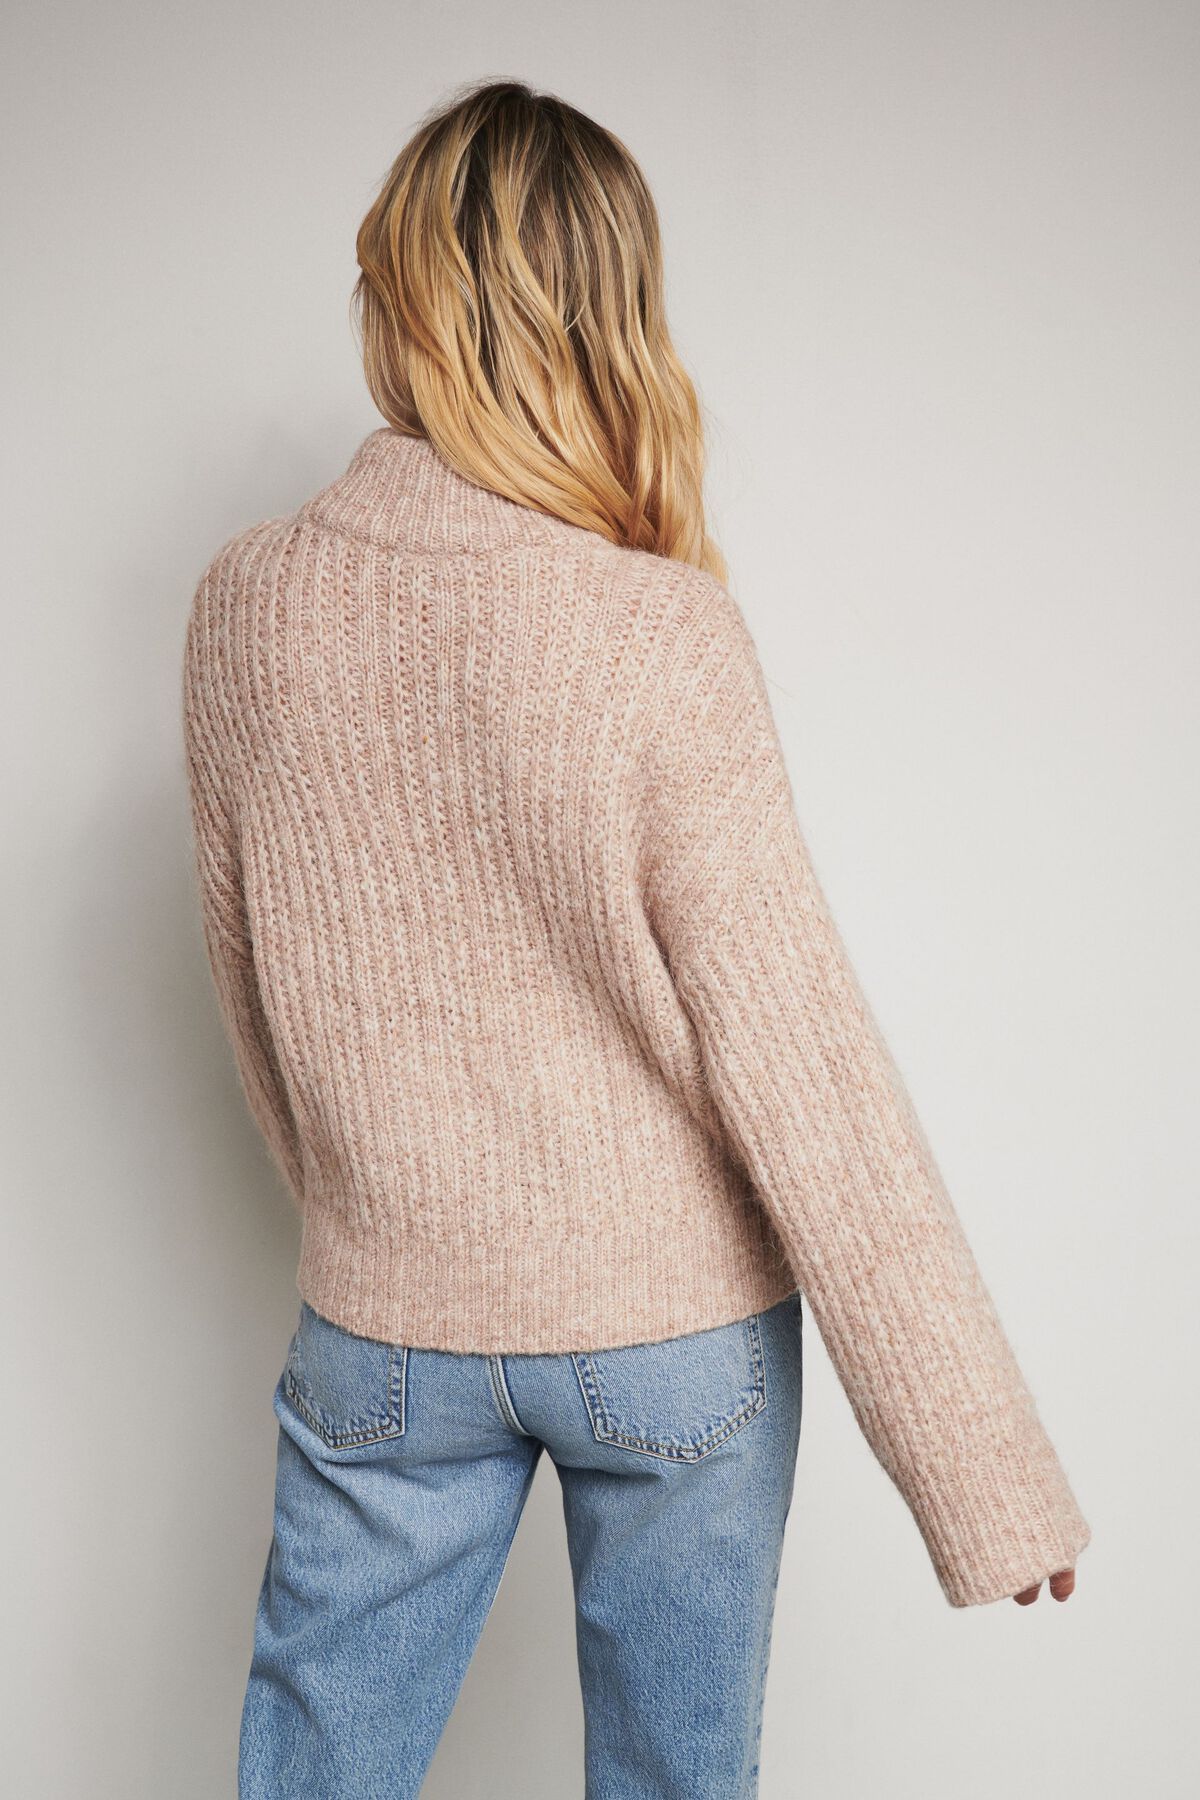 Dynamite Cable Knit Mock Neck Sweater. 4